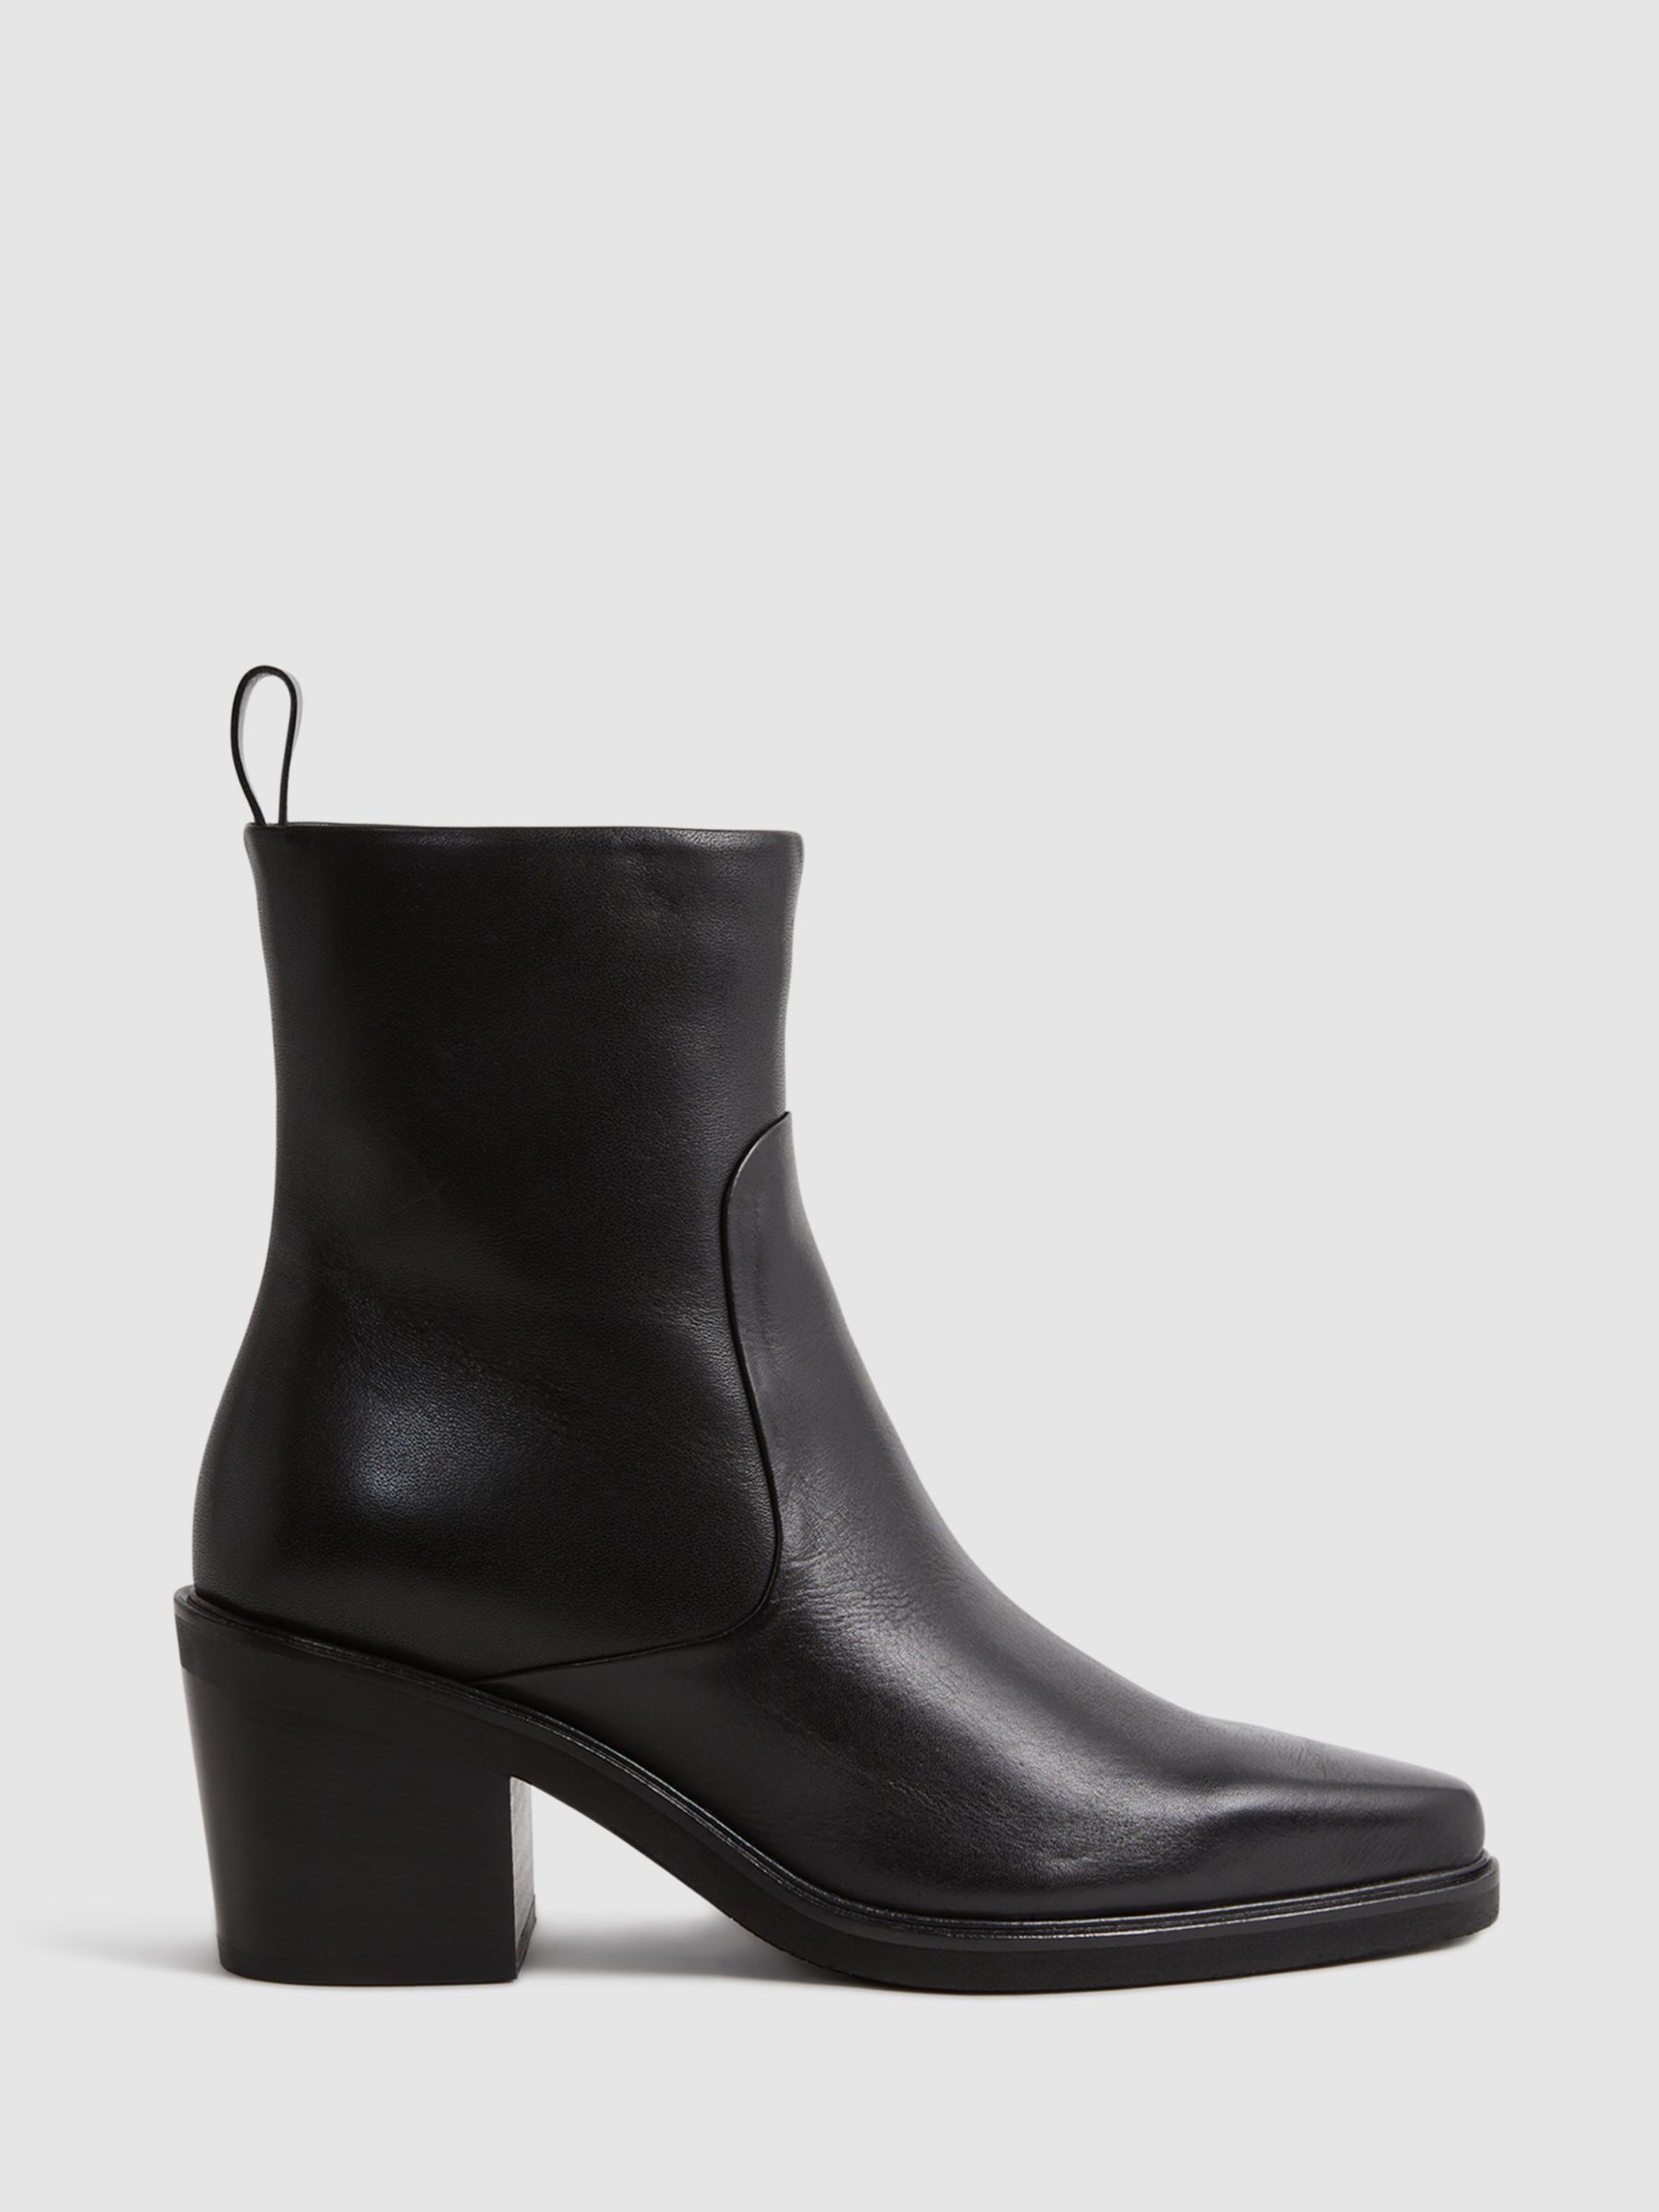 Reiss Sienna Pointed Toe Leather Ankle Boots, Black at John Lewis ...